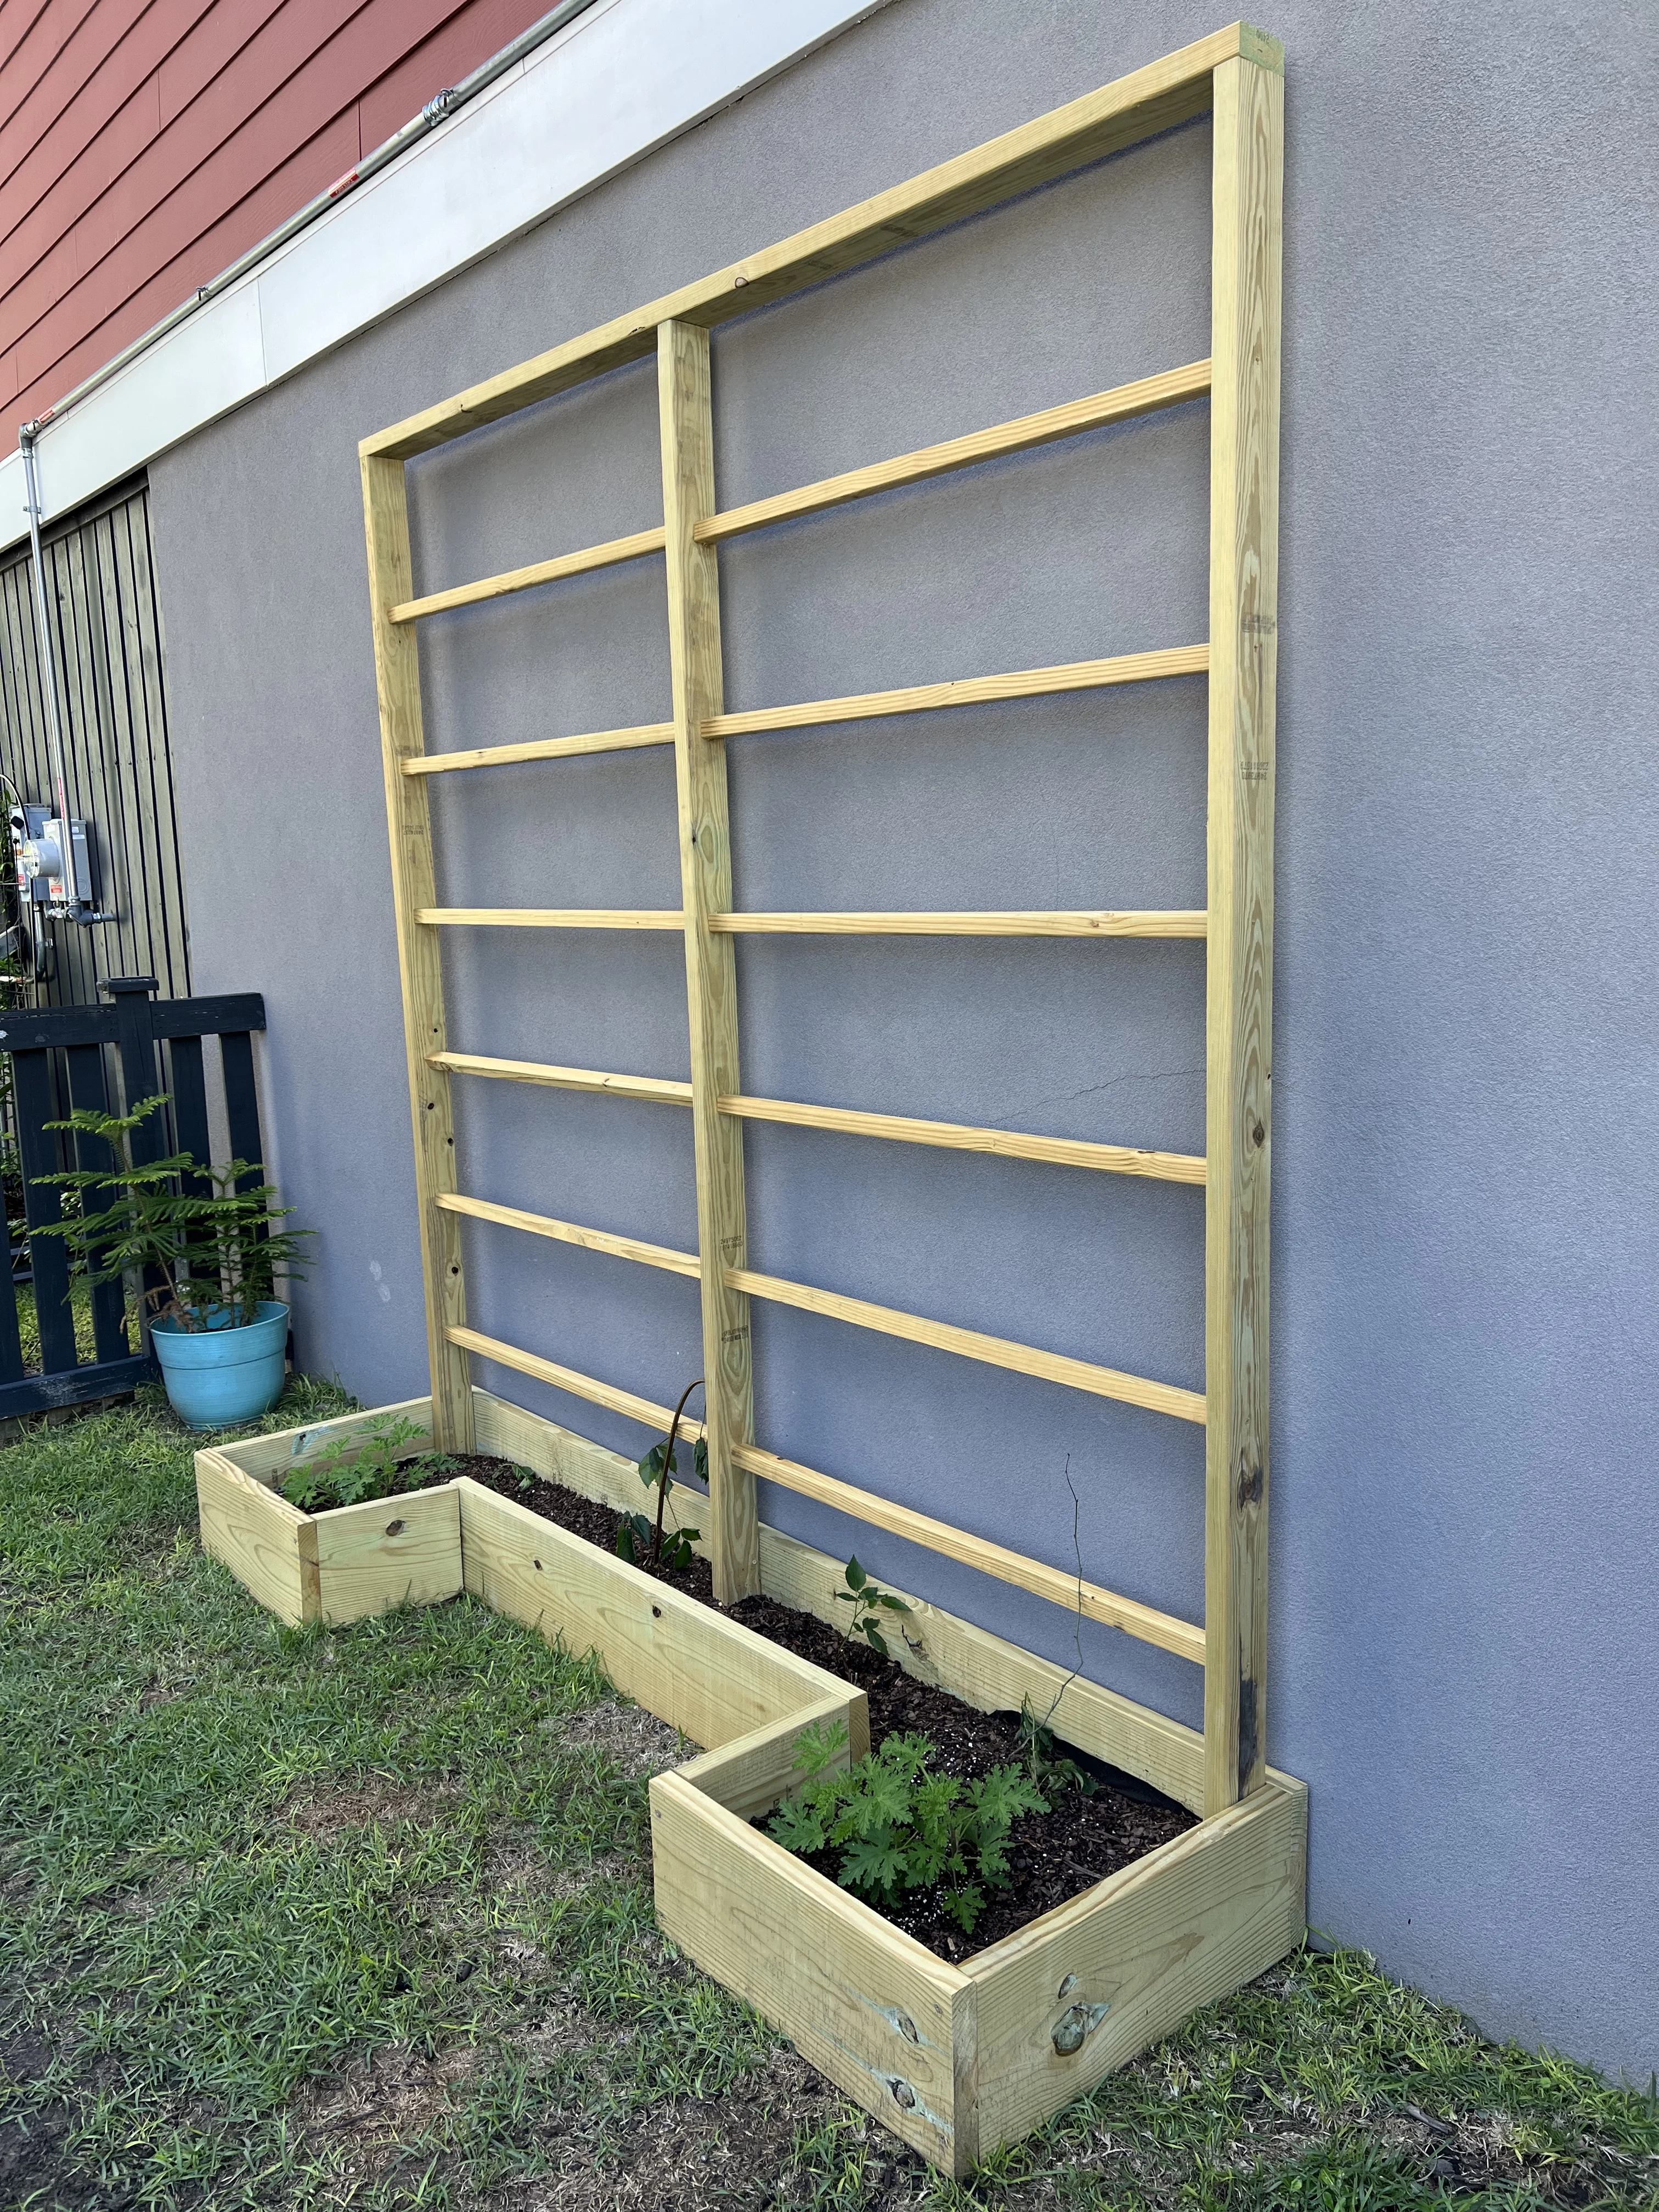 Garden bed with trellis and plants